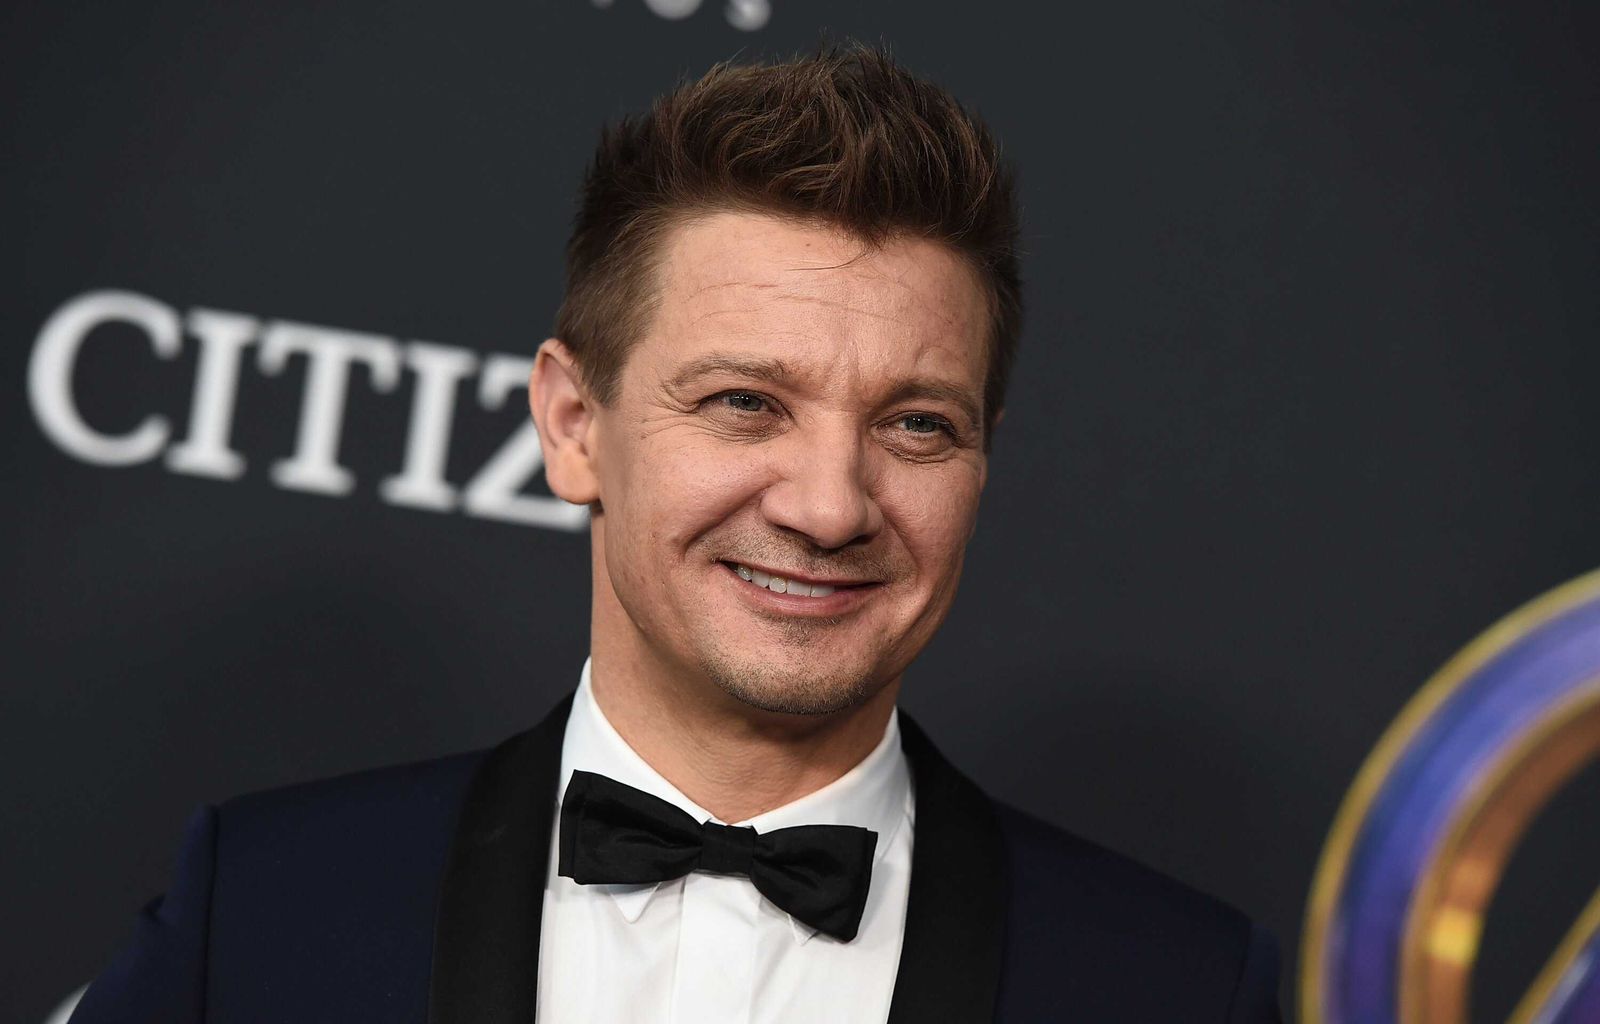 'Never looked back': The meteoric rise of Jeremy Renner from Indie stardom to Marvel's Hawkeye